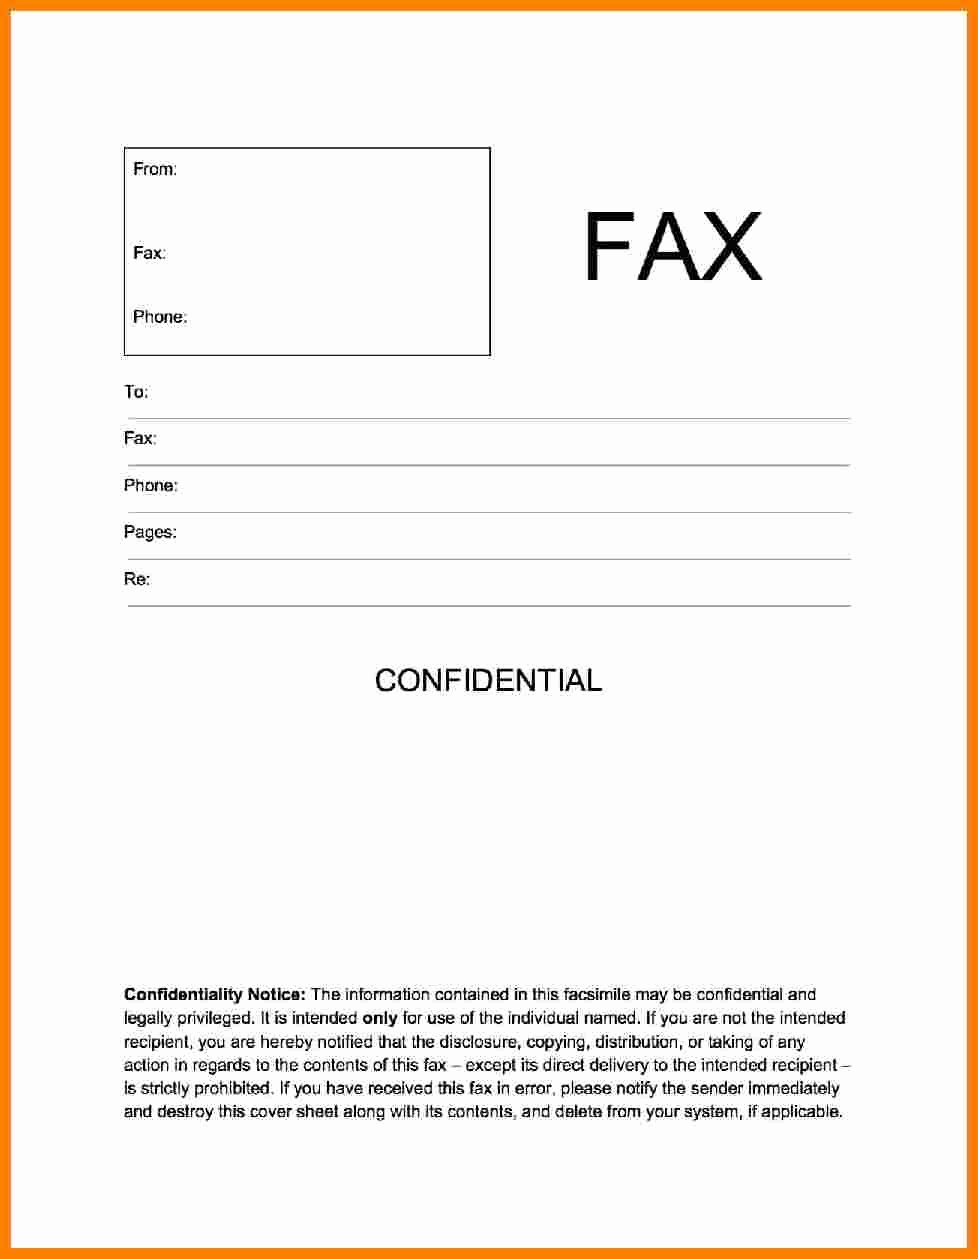 Hipaa Fax Cover Sheet Requirement Elegant 8 Fax Confidentiality Disclaimer